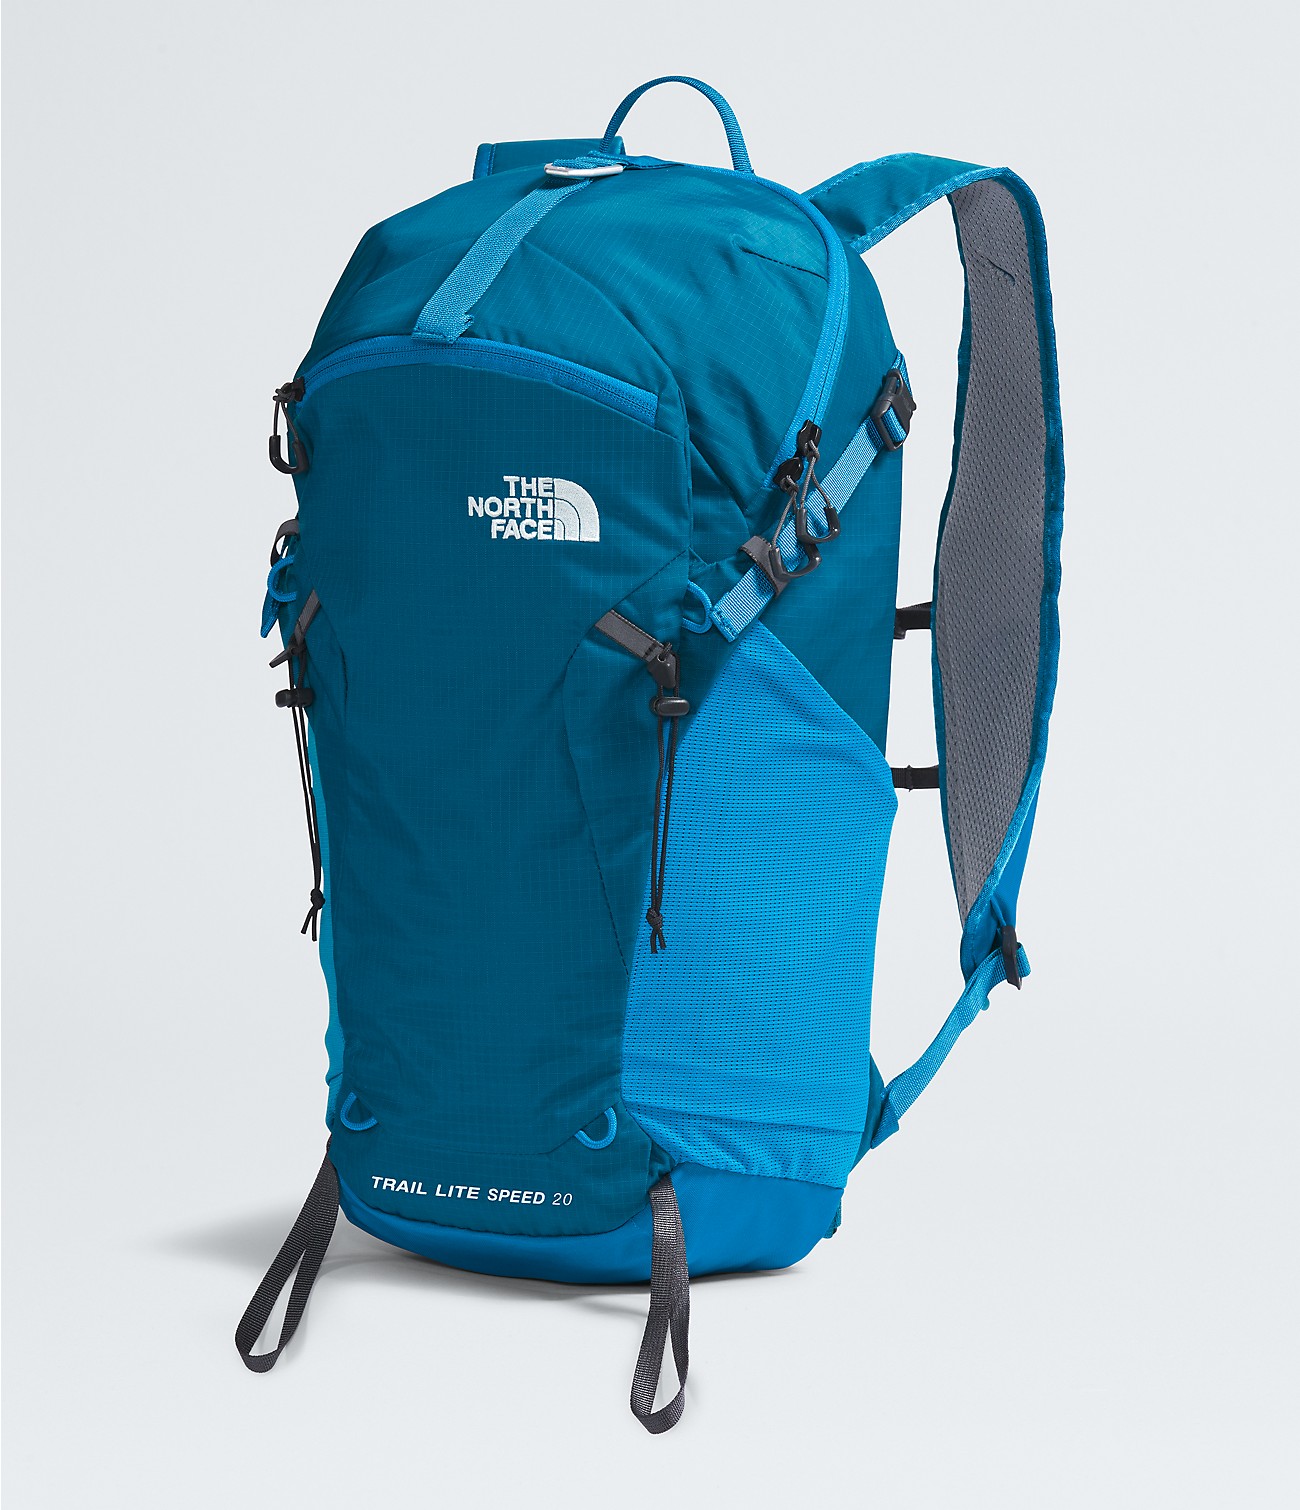 Trail Lite Speed 20 Backpack | The North Face